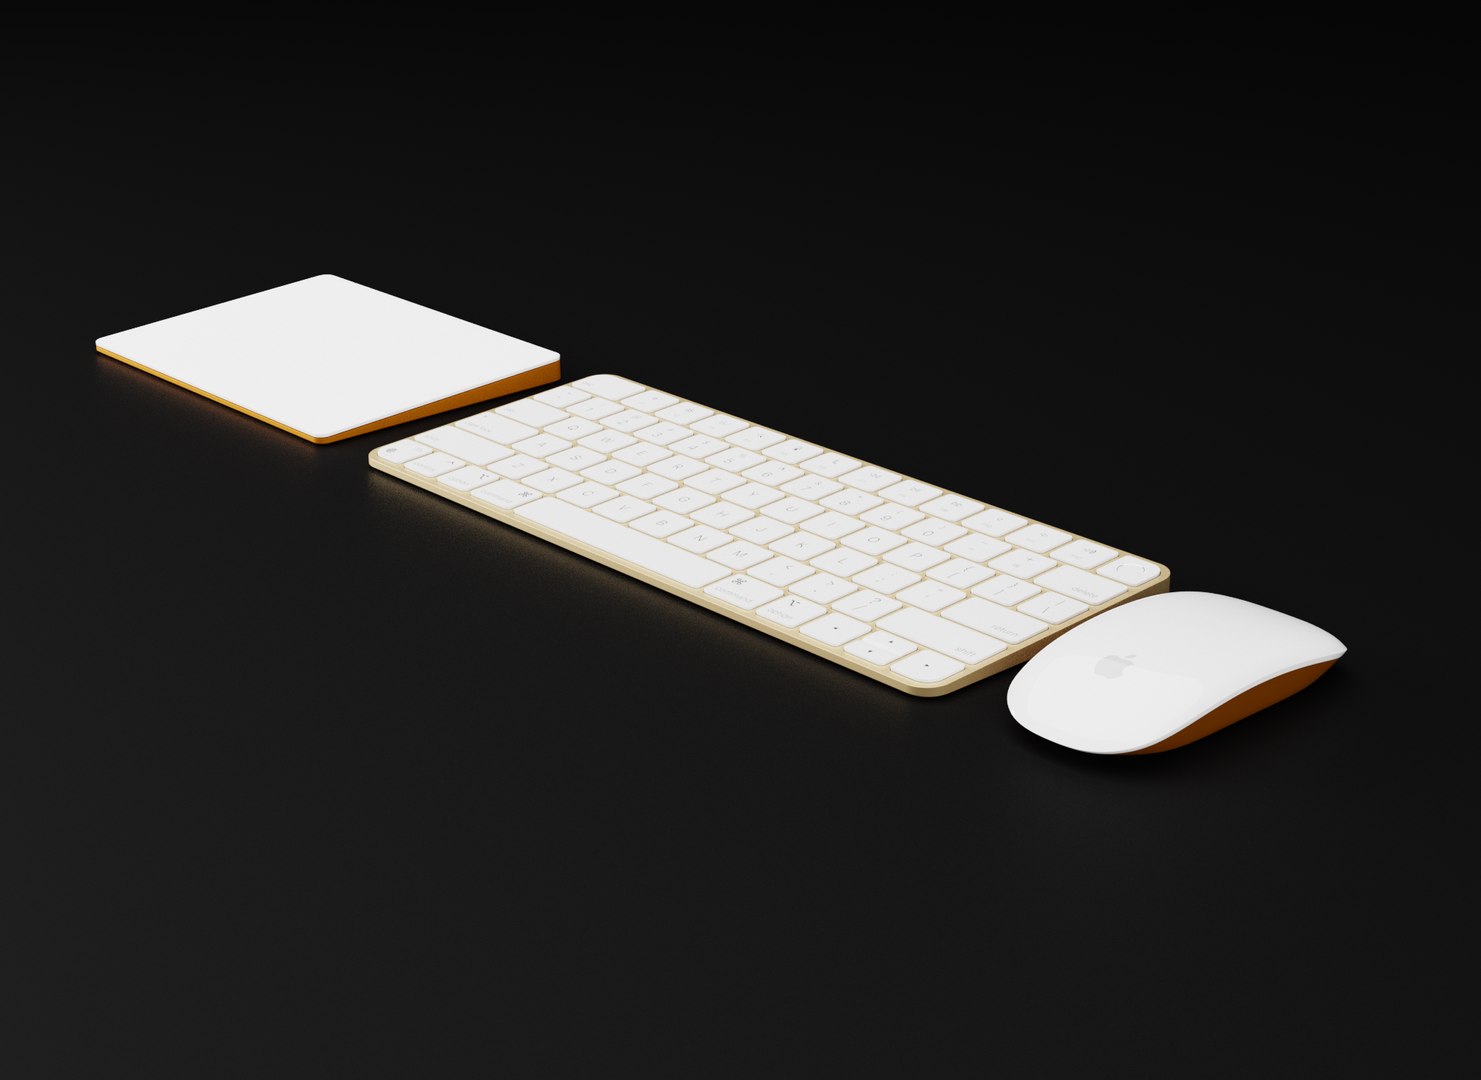 Get a Magic Keyboard and Magic Mouse for your Mac and save $39